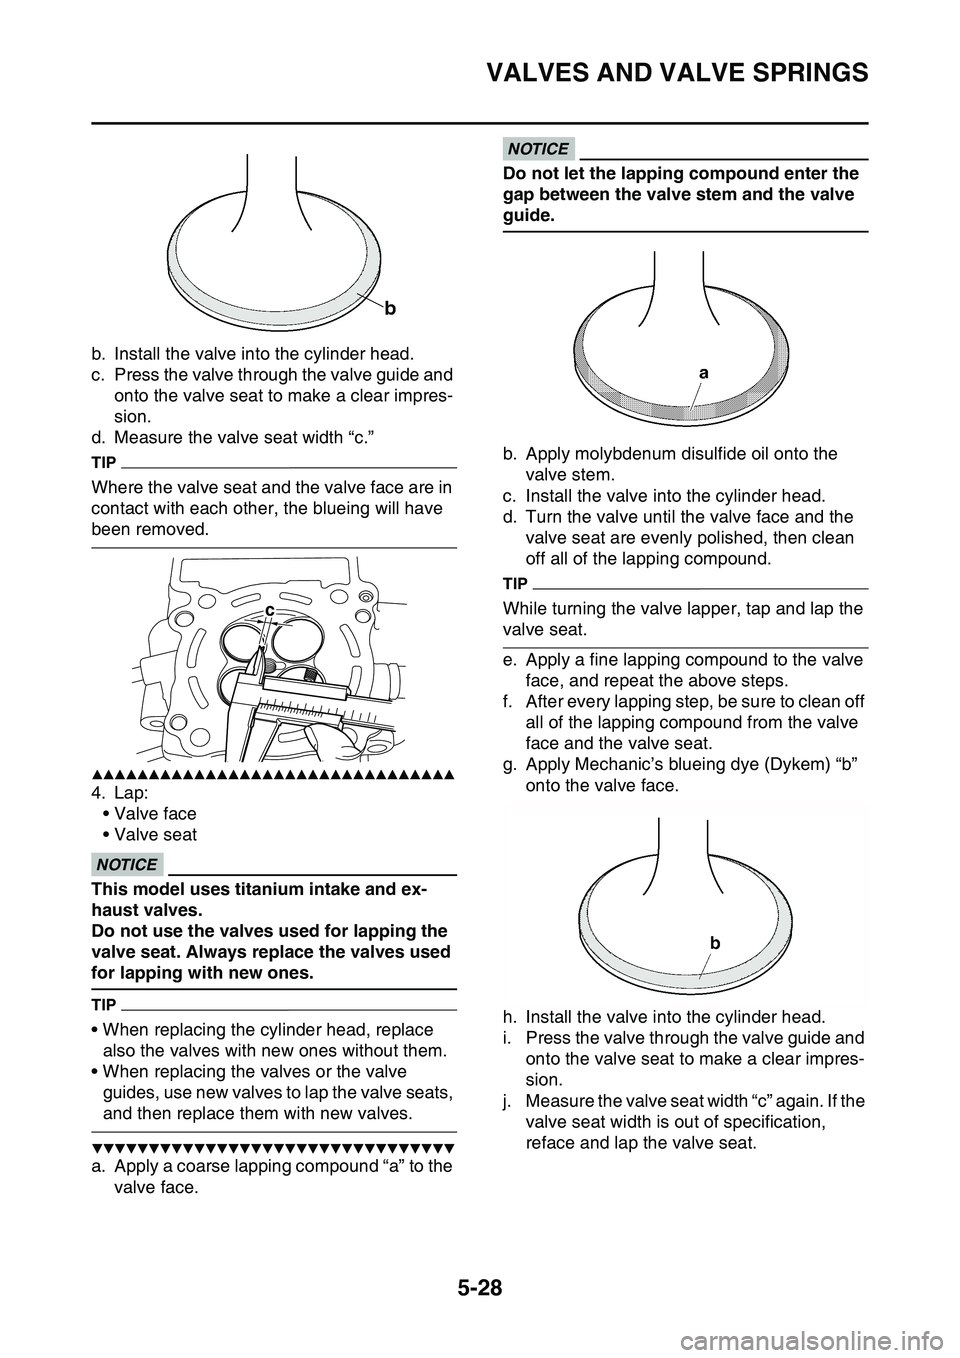 YAMAHA YZ450F 2014  Owners Manual VALVES AND VALVE SPRINGS
5-28
b. Install the valve into the cylinder head.
c. Press the valve through the valve guide and 
onto the valve seat to make a clear impres
-
sion.
d. Measure the valve seat 